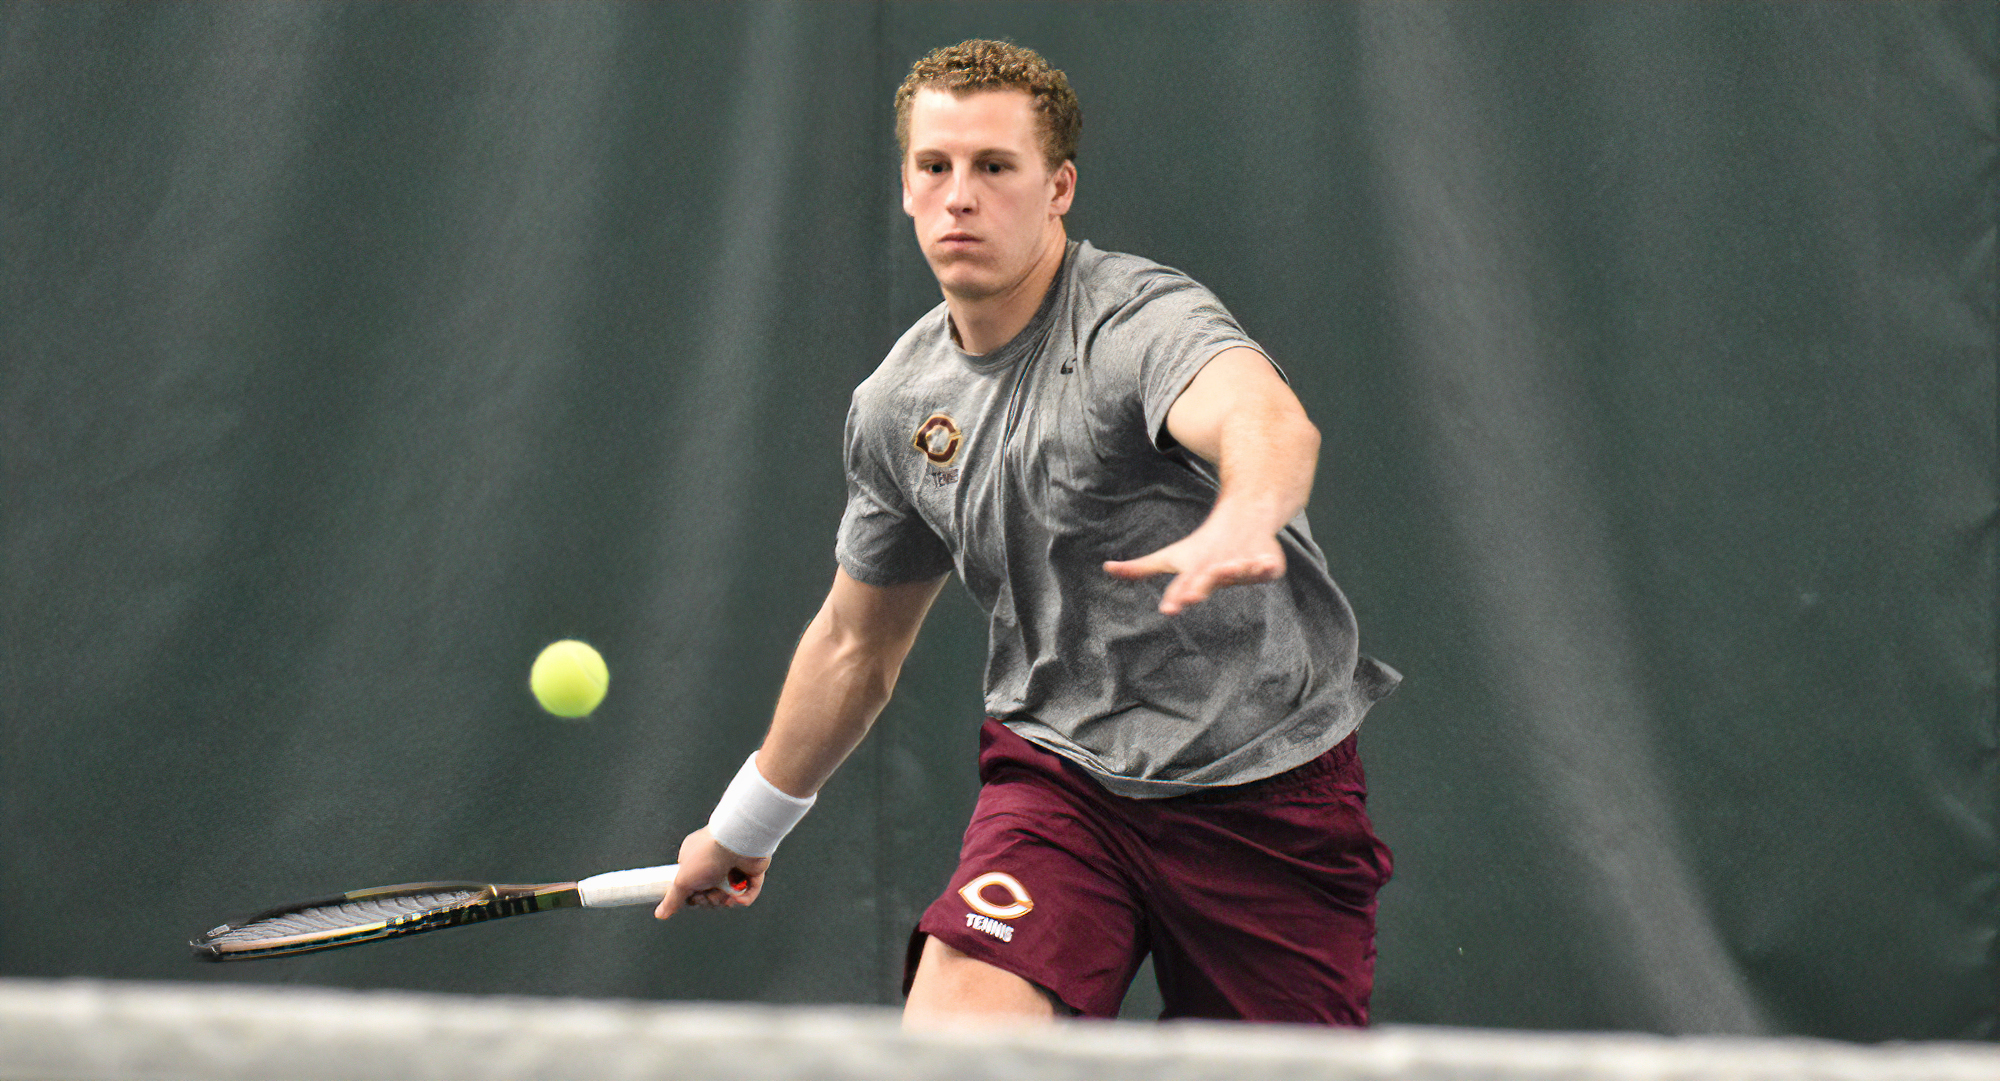 Senior Nicholas Ness had one of the two singles wins in the Cobbers' match at St. Olaf. It was Ness' first singles victory of the year.